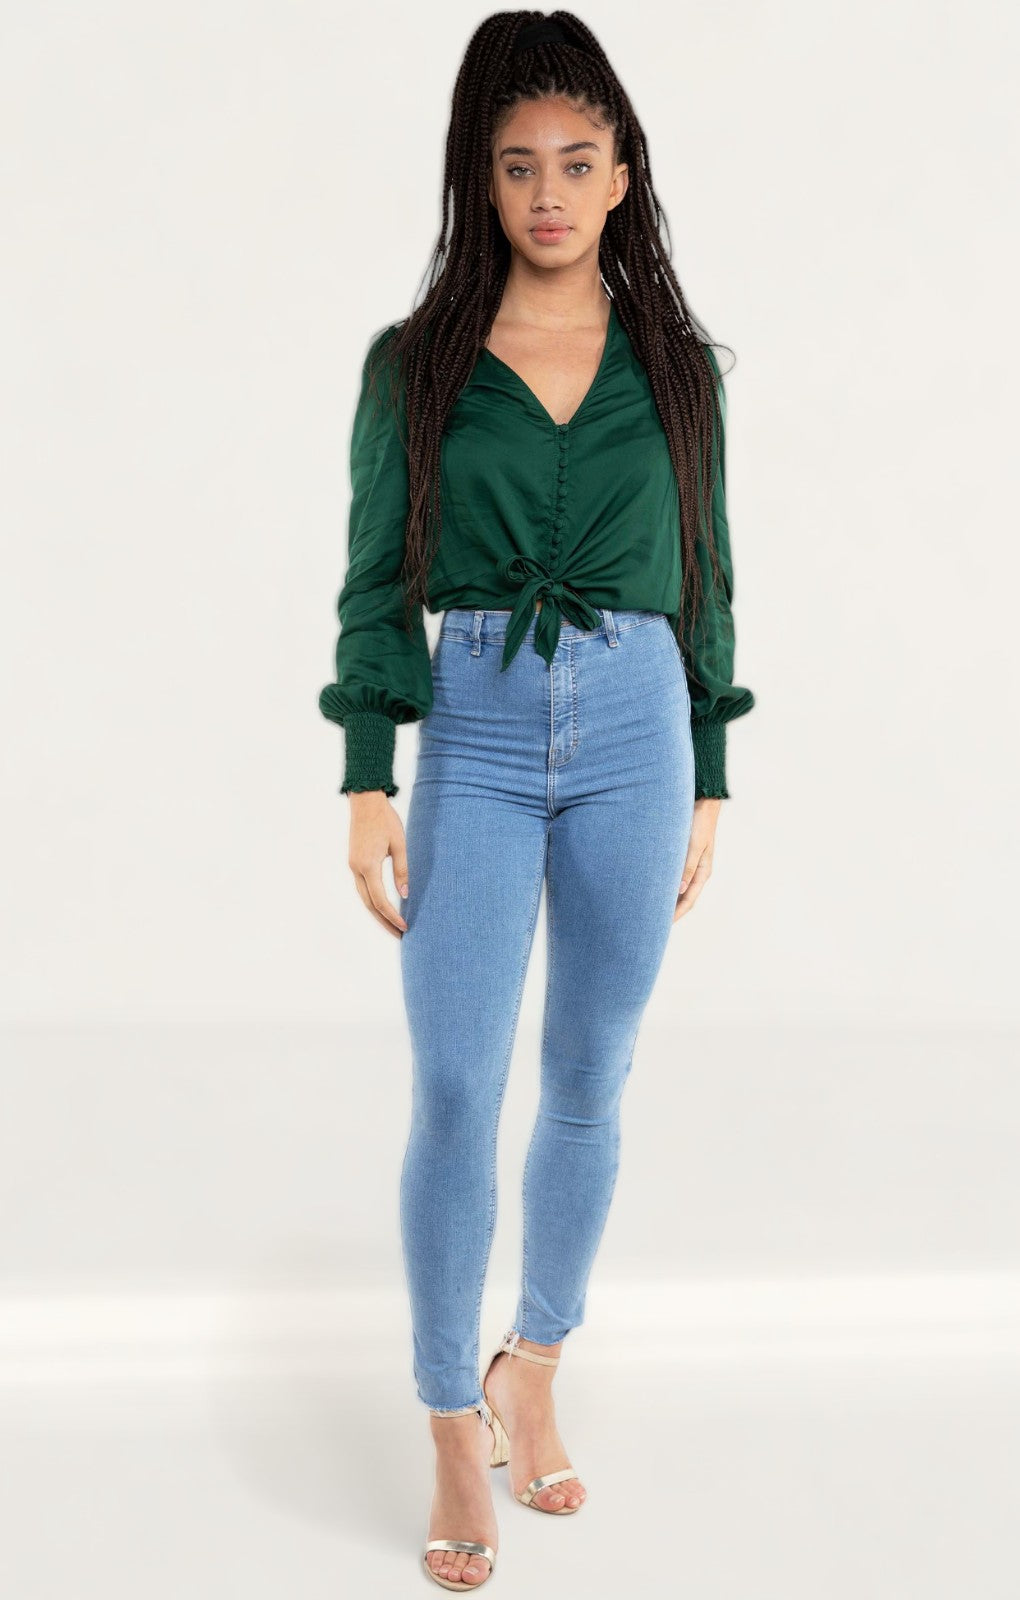 Zara Green Satin Blouse With Knot Detail